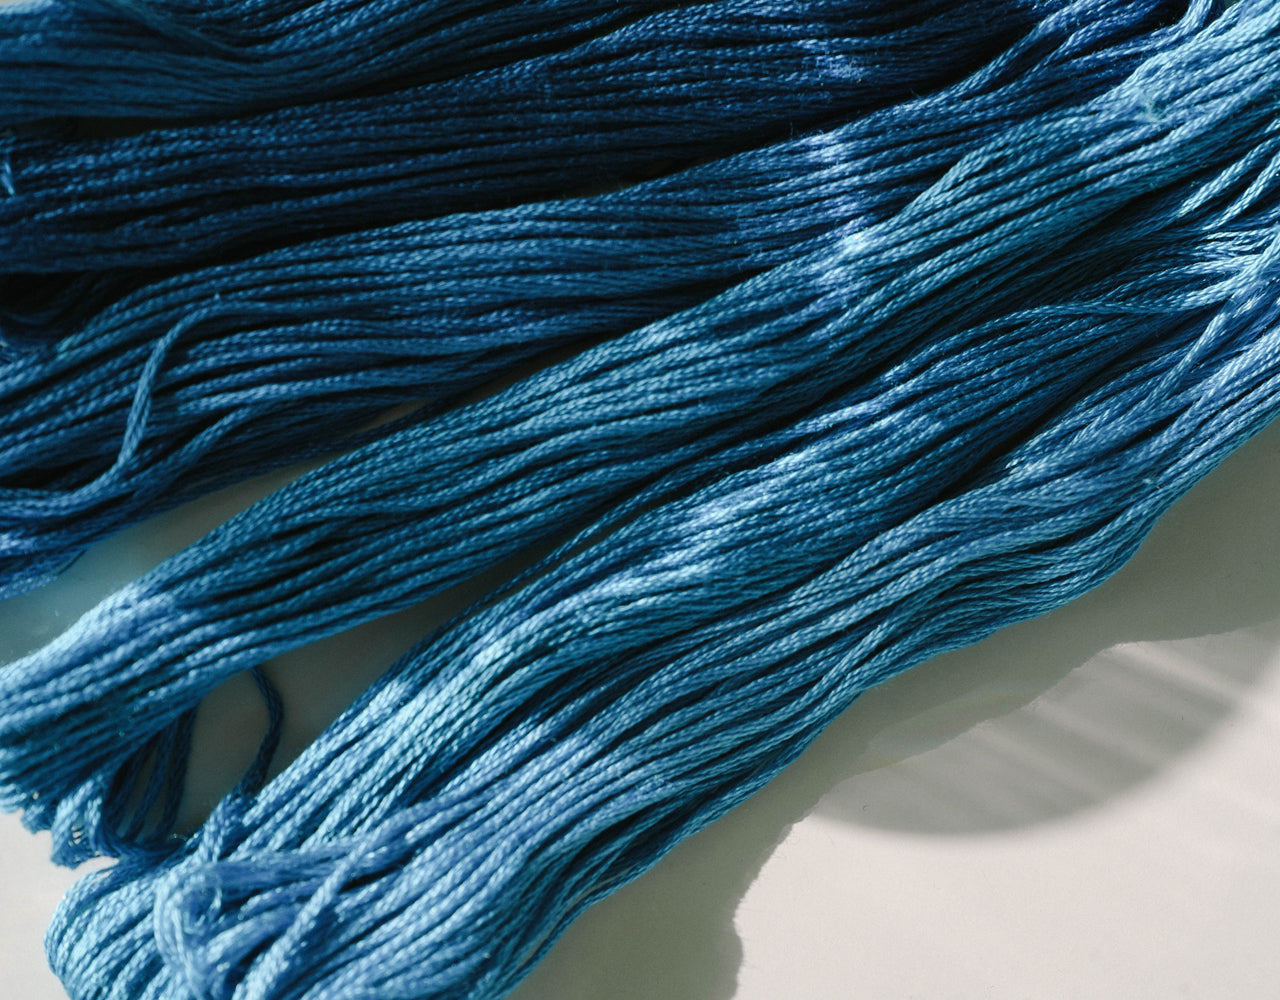 Close-up of bunches of indigo-colored cotton thread with spots of light shining on it